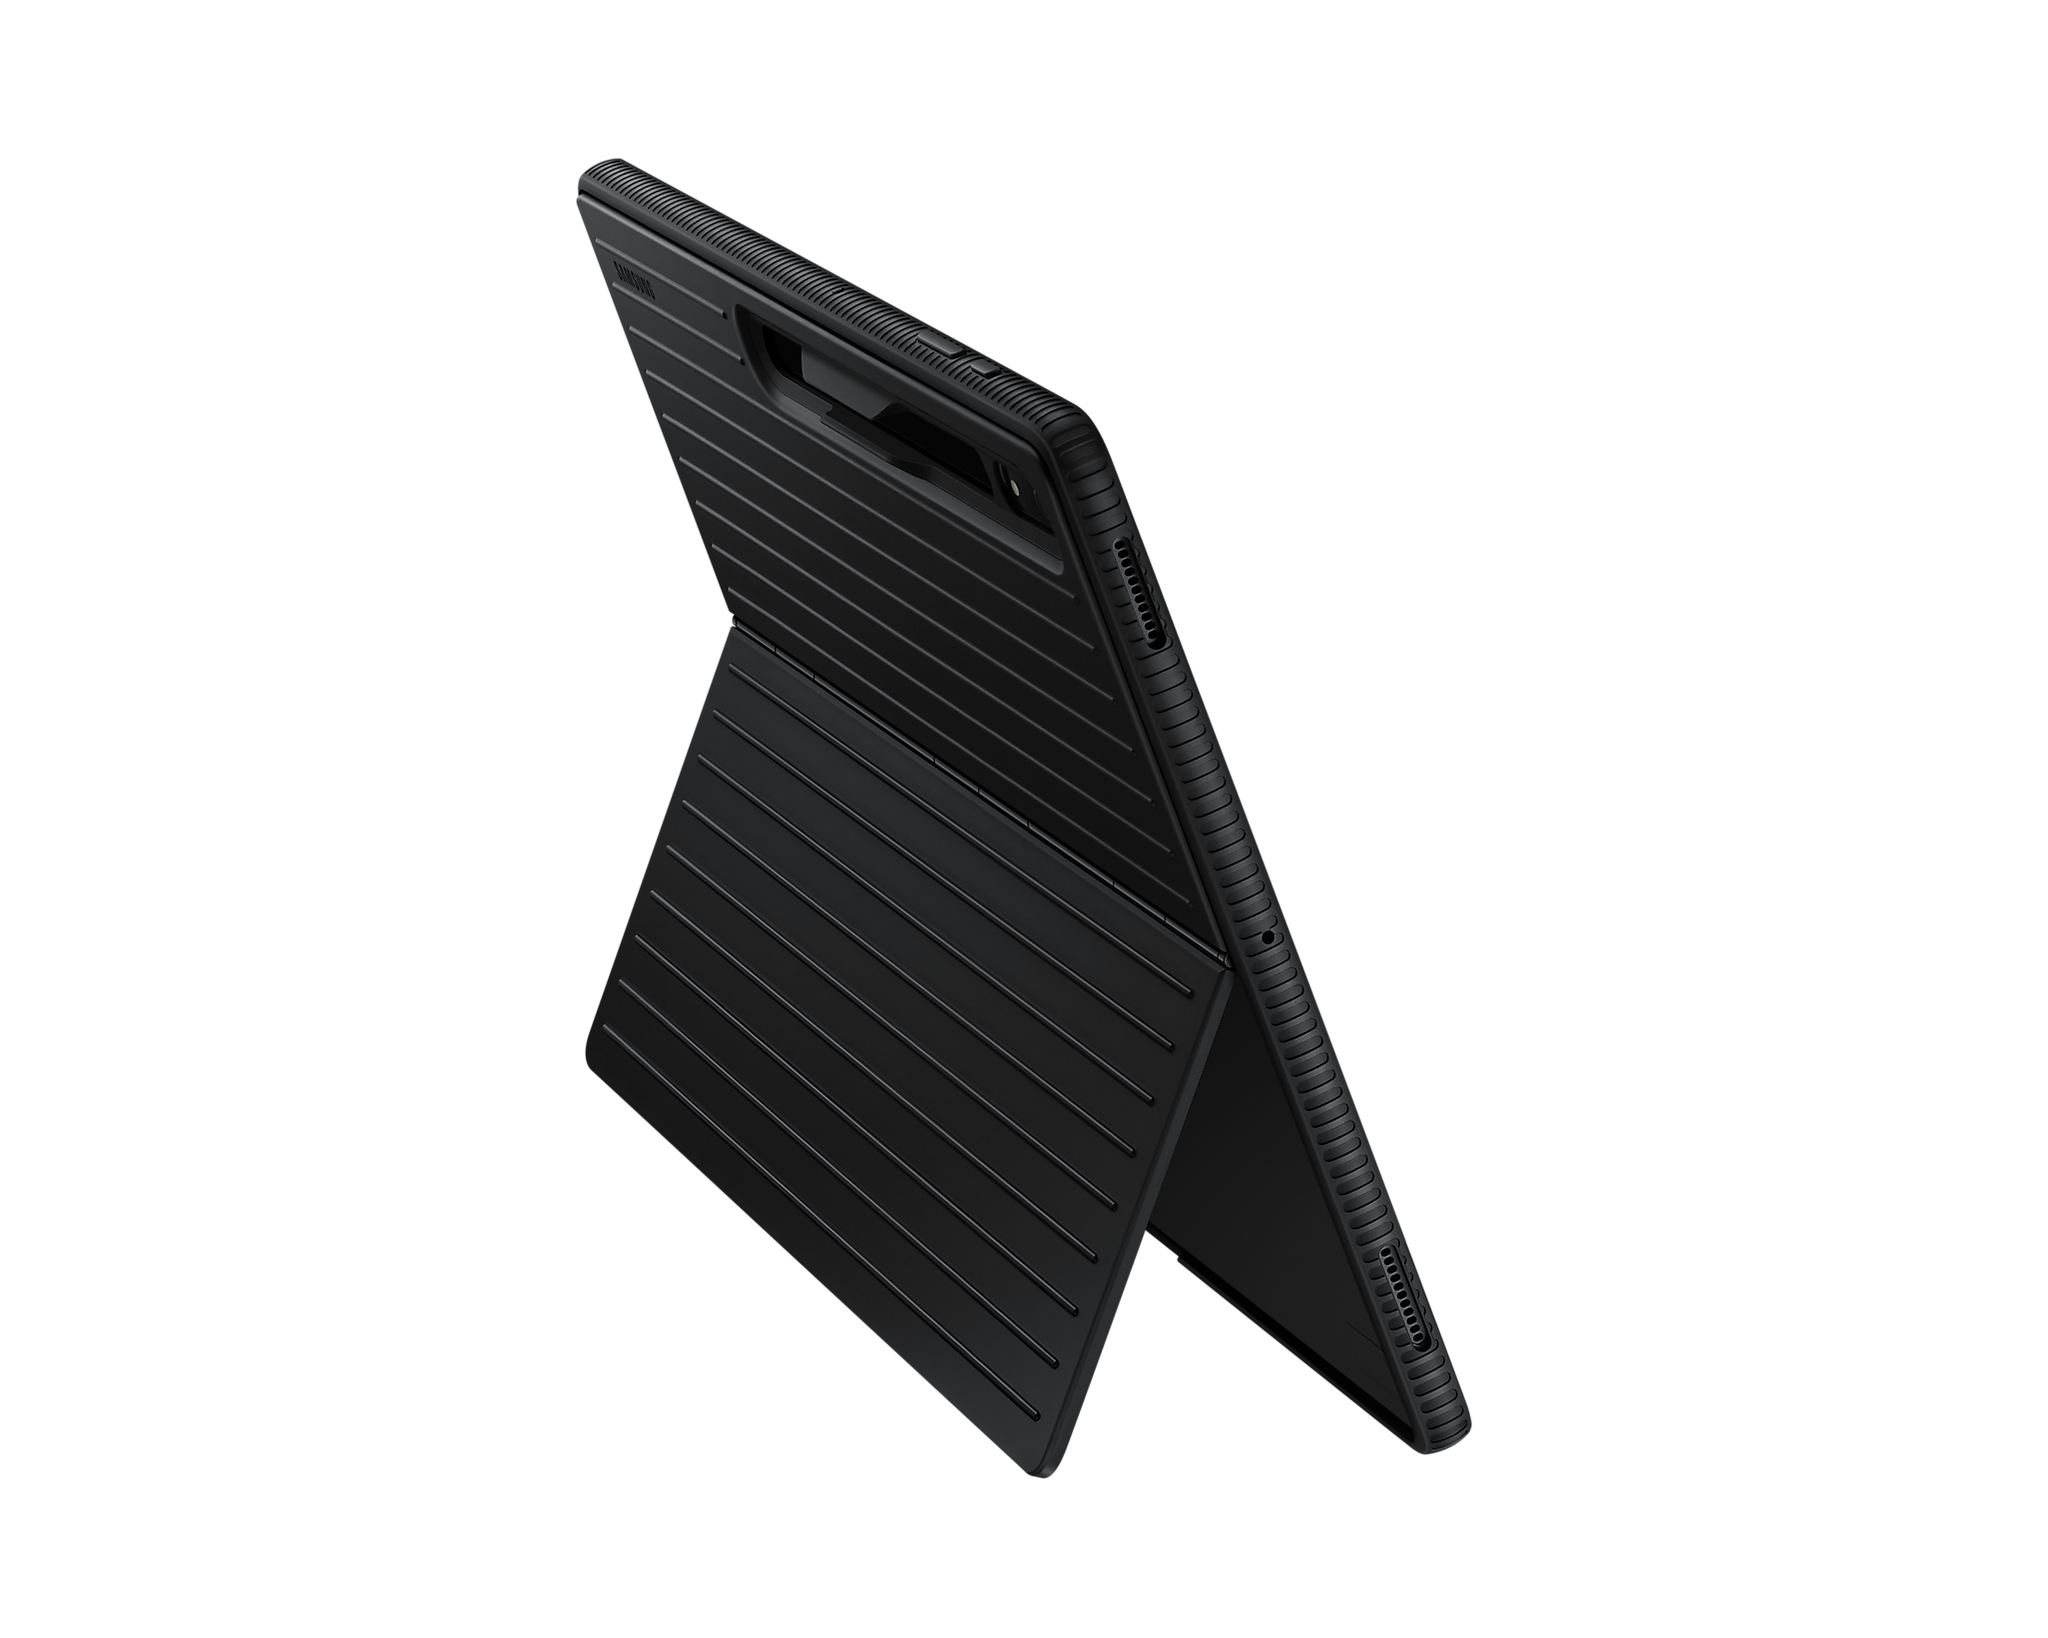 Galaxy Tab S8 Ultra Protective Standing Cover - Black